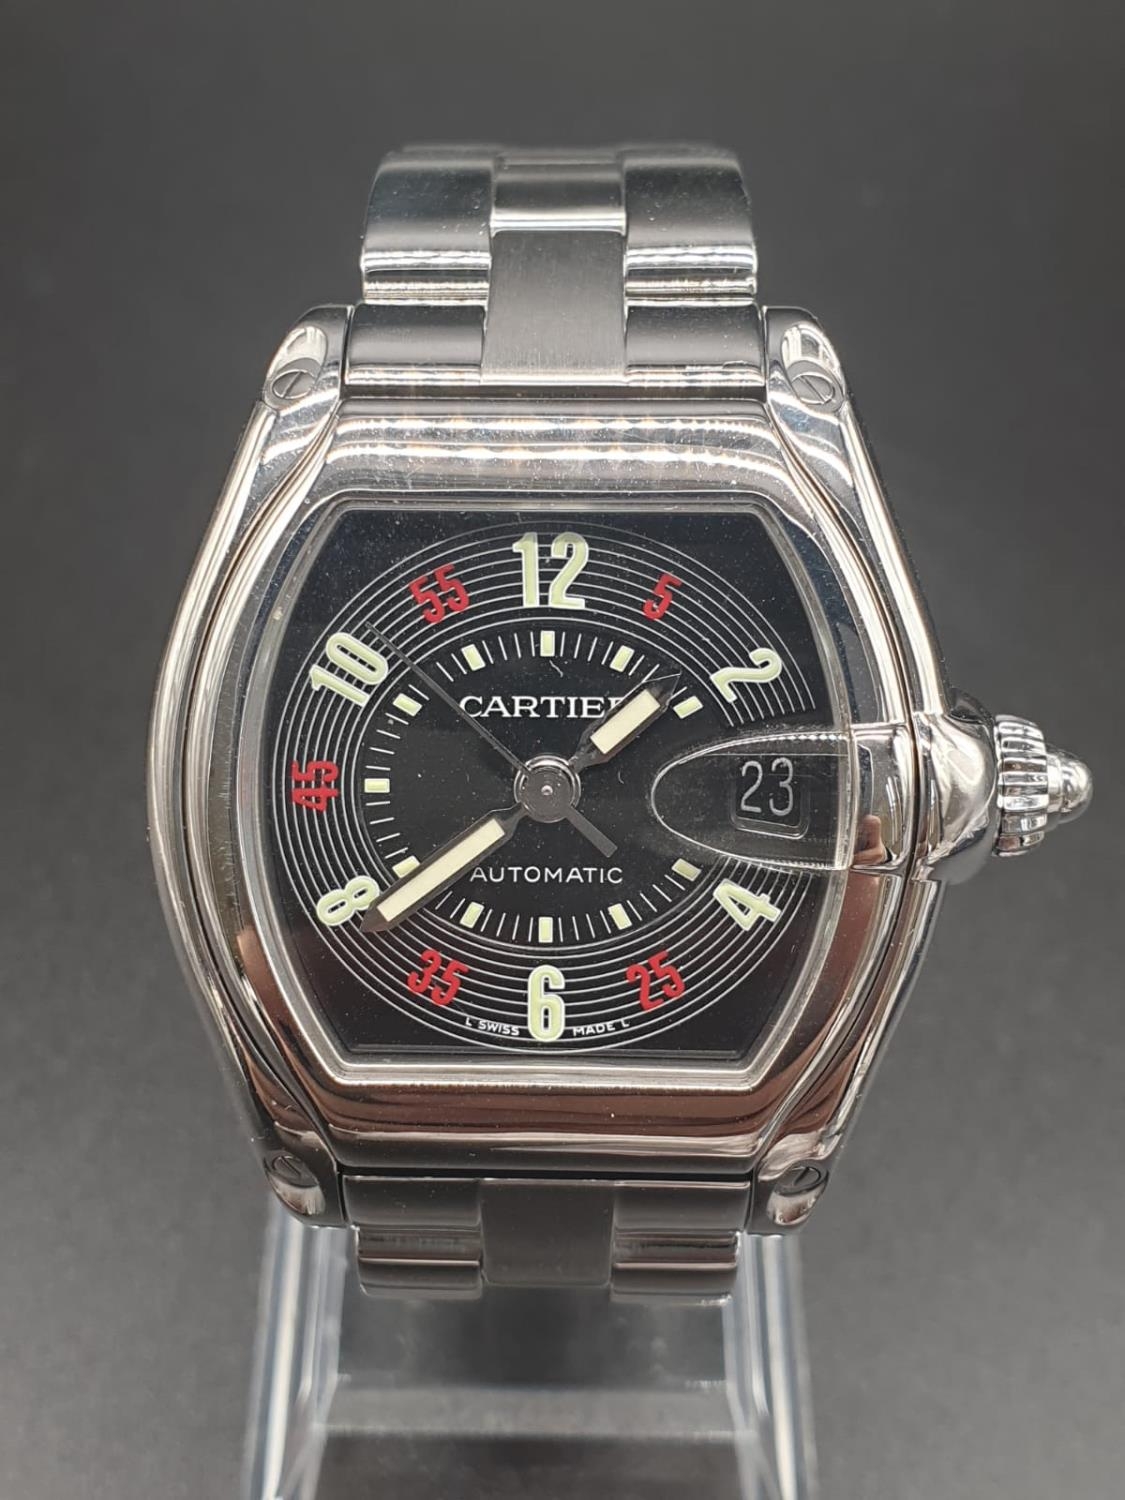 A CARTIER ROADSTER TANK STYLE AUTOMATIC STAINESS STEEL WRIST WATCH IN EXCELLENT CONDITION 36mm